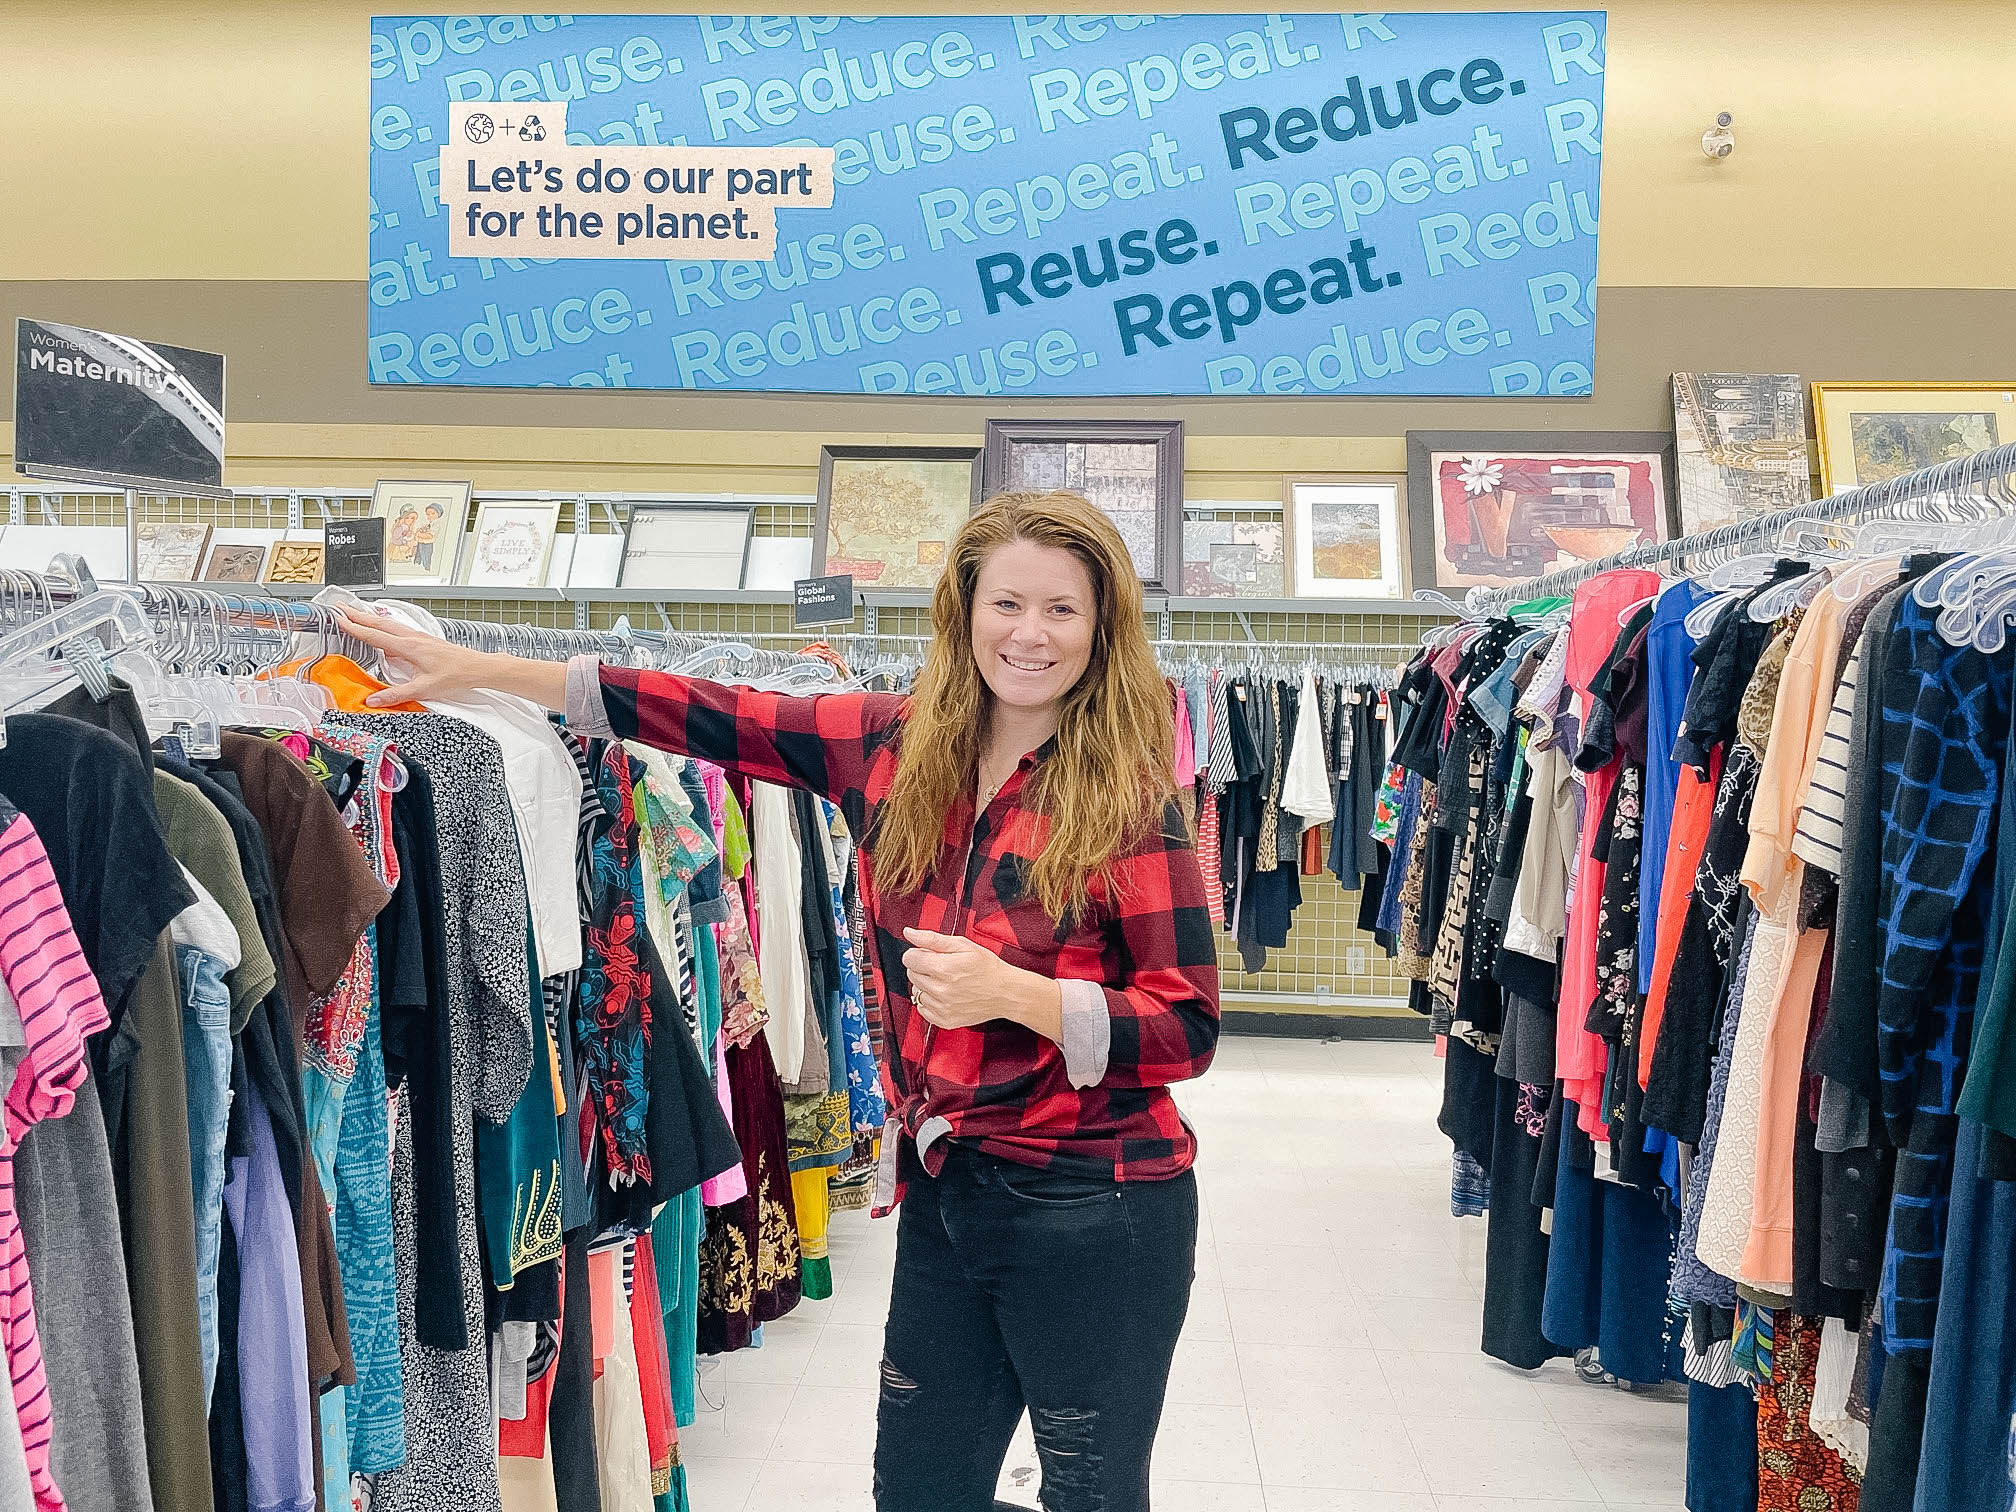 woman standing in an aisle between racks of clothing in a thrift store as Ways to Save Money For Back To School Season